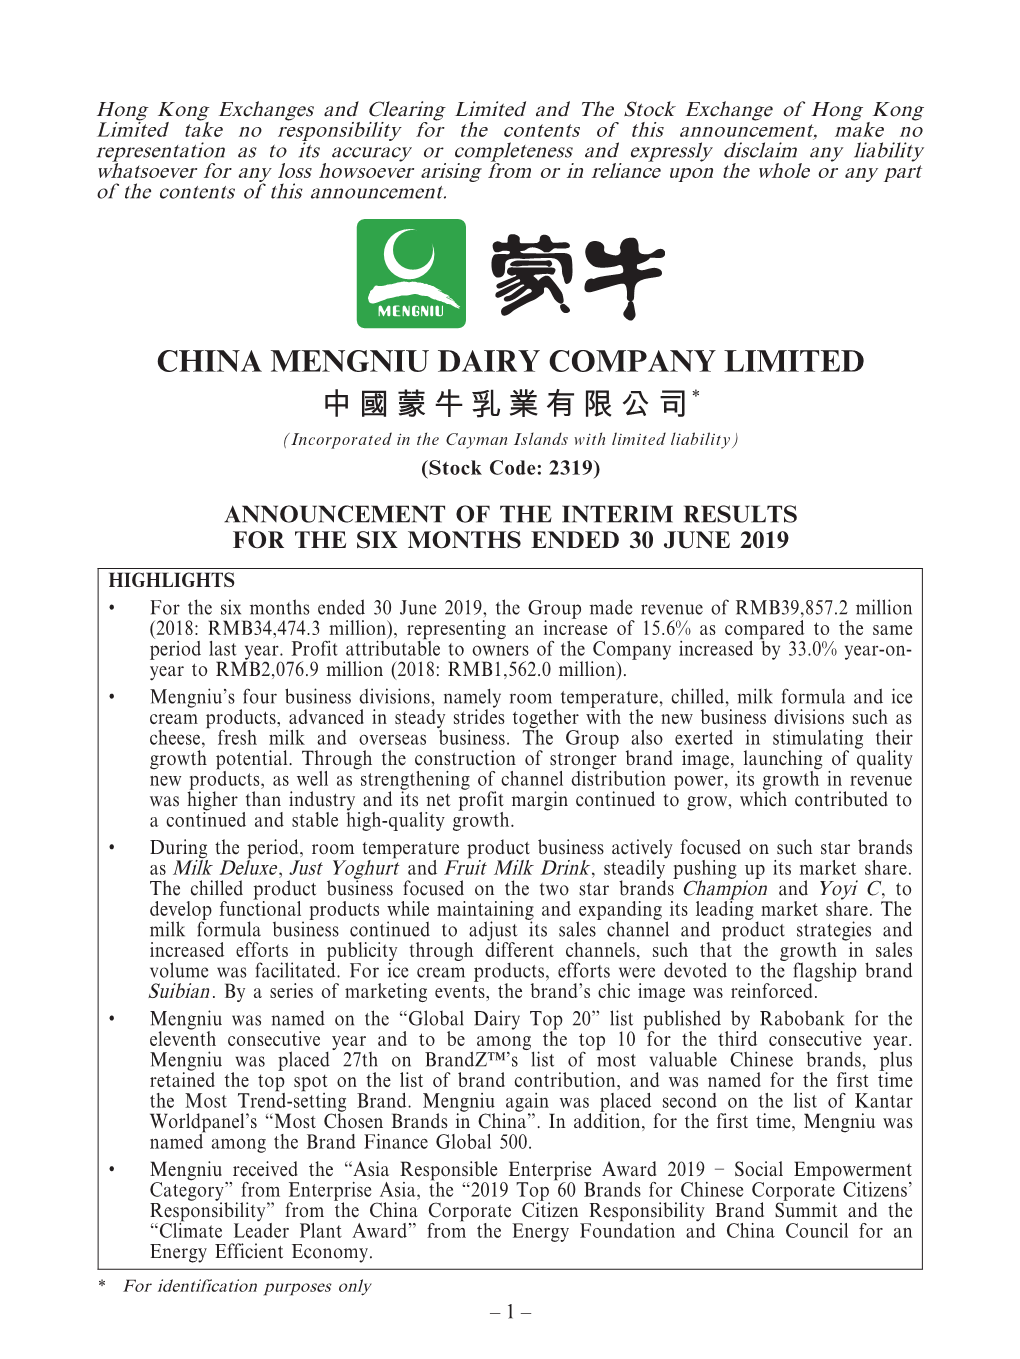 CHINA MENGNIU DAIRY COMPANY LIMITED 中國蒙牛乳業有限公司* (Incorporated in the Cayman Islands with Limited Liability) (Stock Code: 2319)